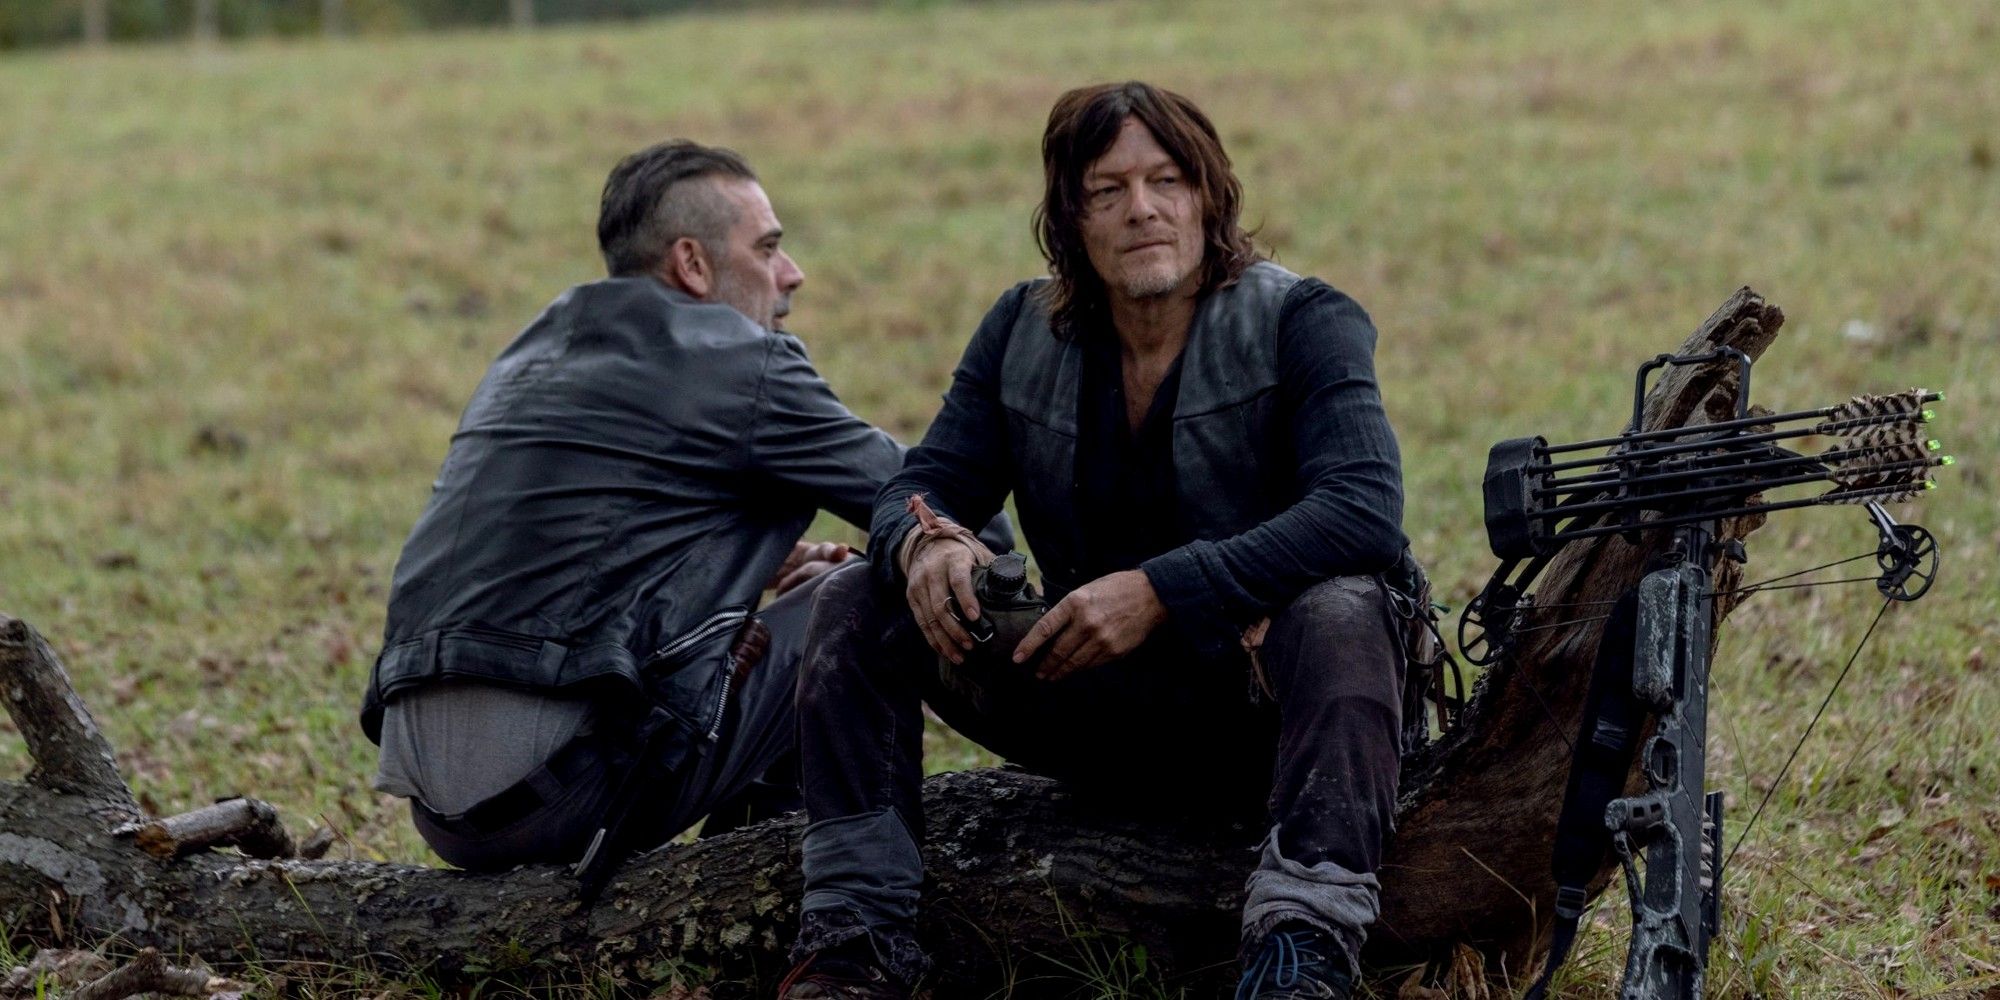 Negan and Daryl from The Walking Dead season 10